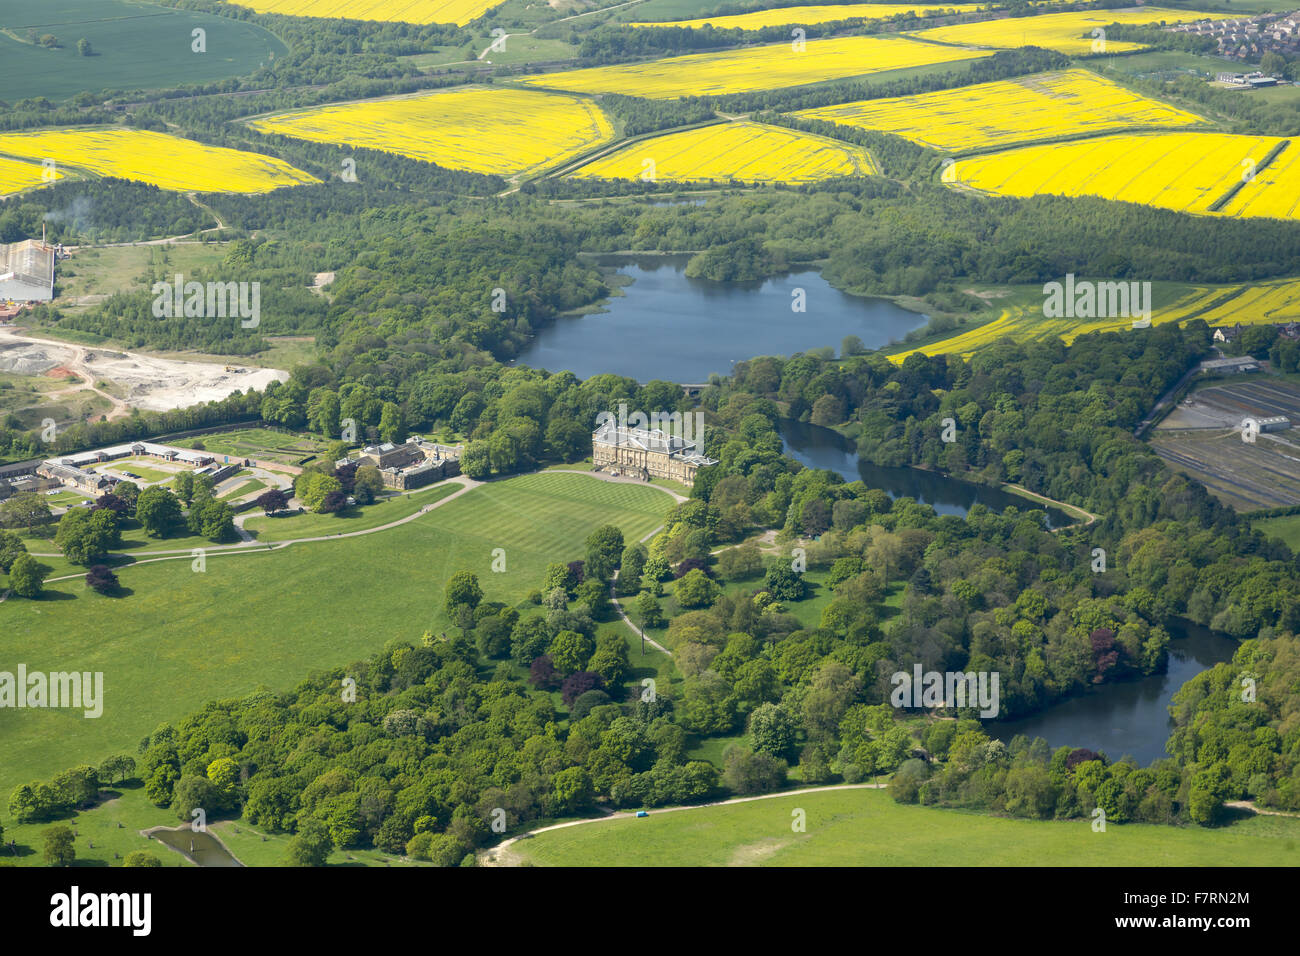 An aerial view of Nostell Priory and Parkland, West Yorkshire. Nostell Priory was the home of the Winn family for more than 350 years. Stock Photo